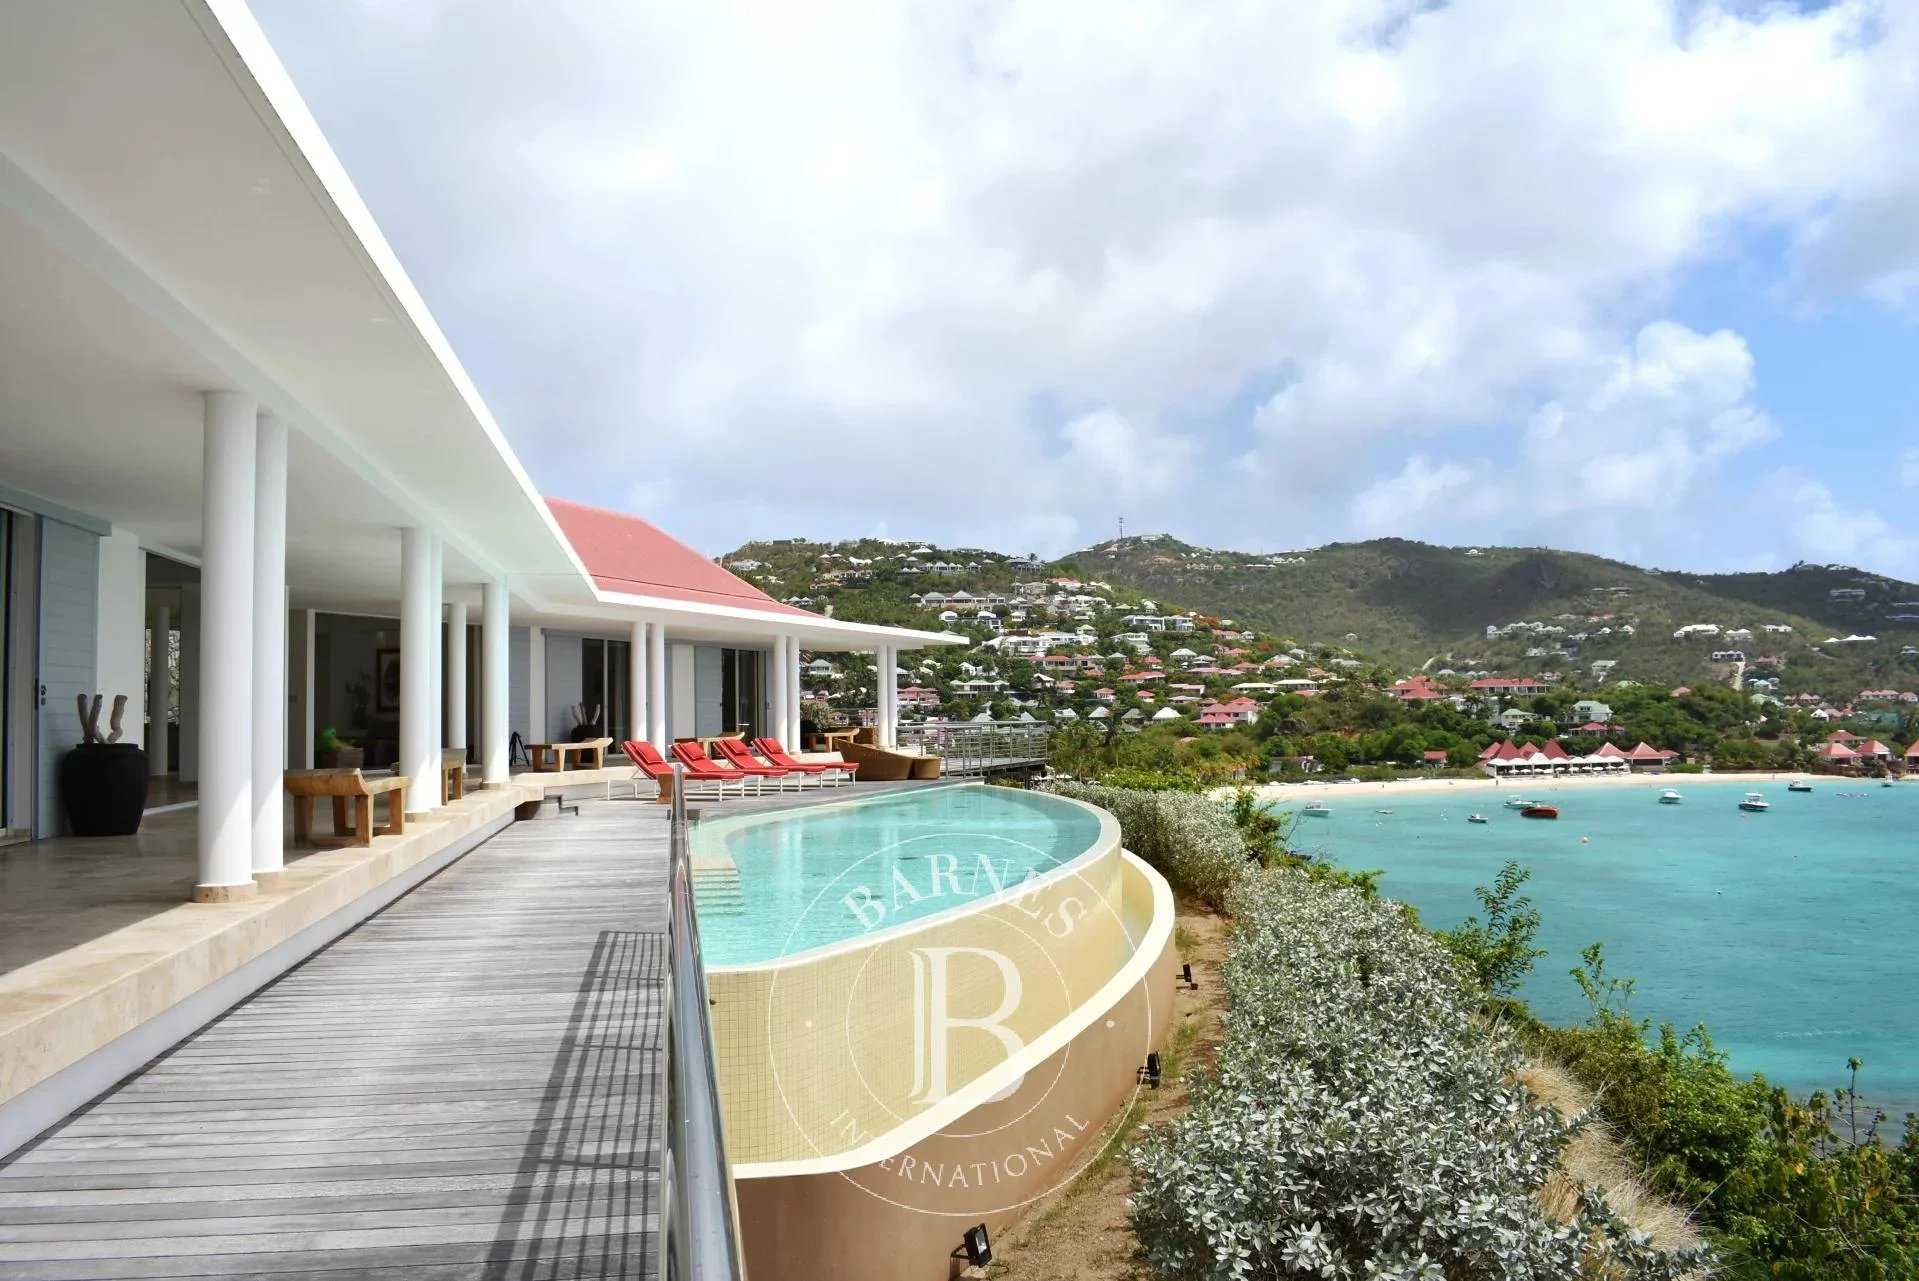 3 bedroom villa with view over St Jean's bay picture 19